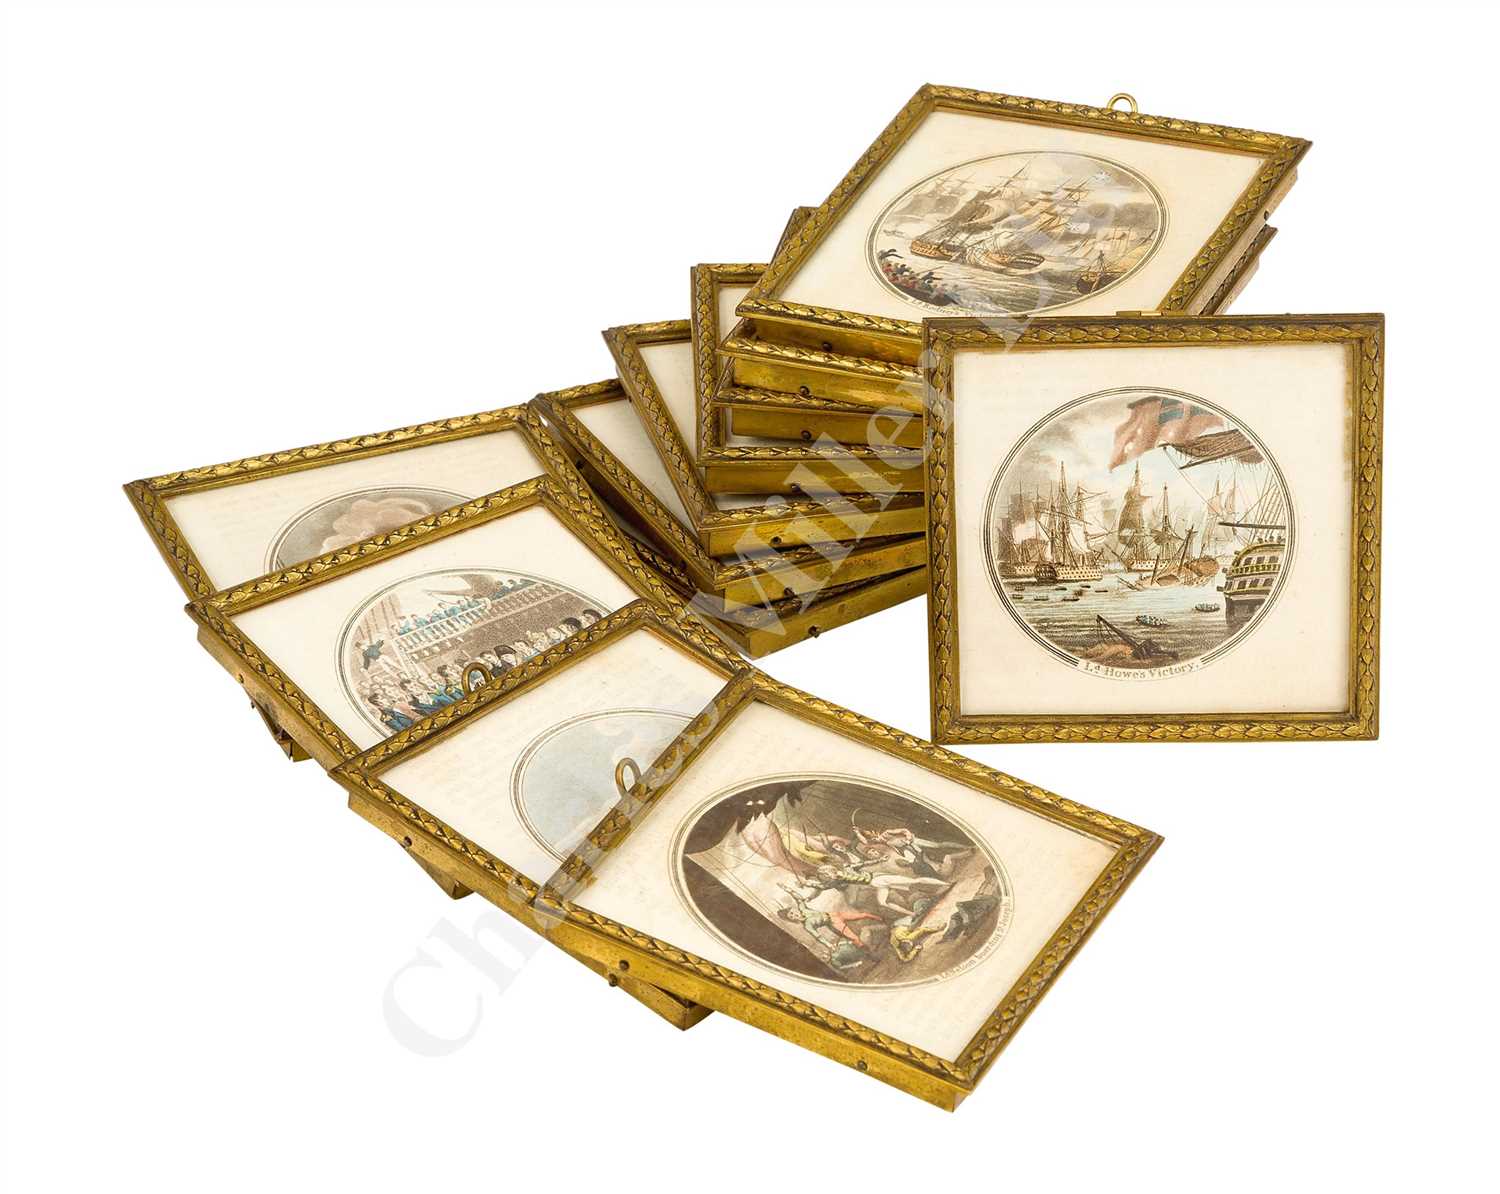 Lot 56 - A SET OF ORME'S NAVAL VICTORIES, CIRCA 1817